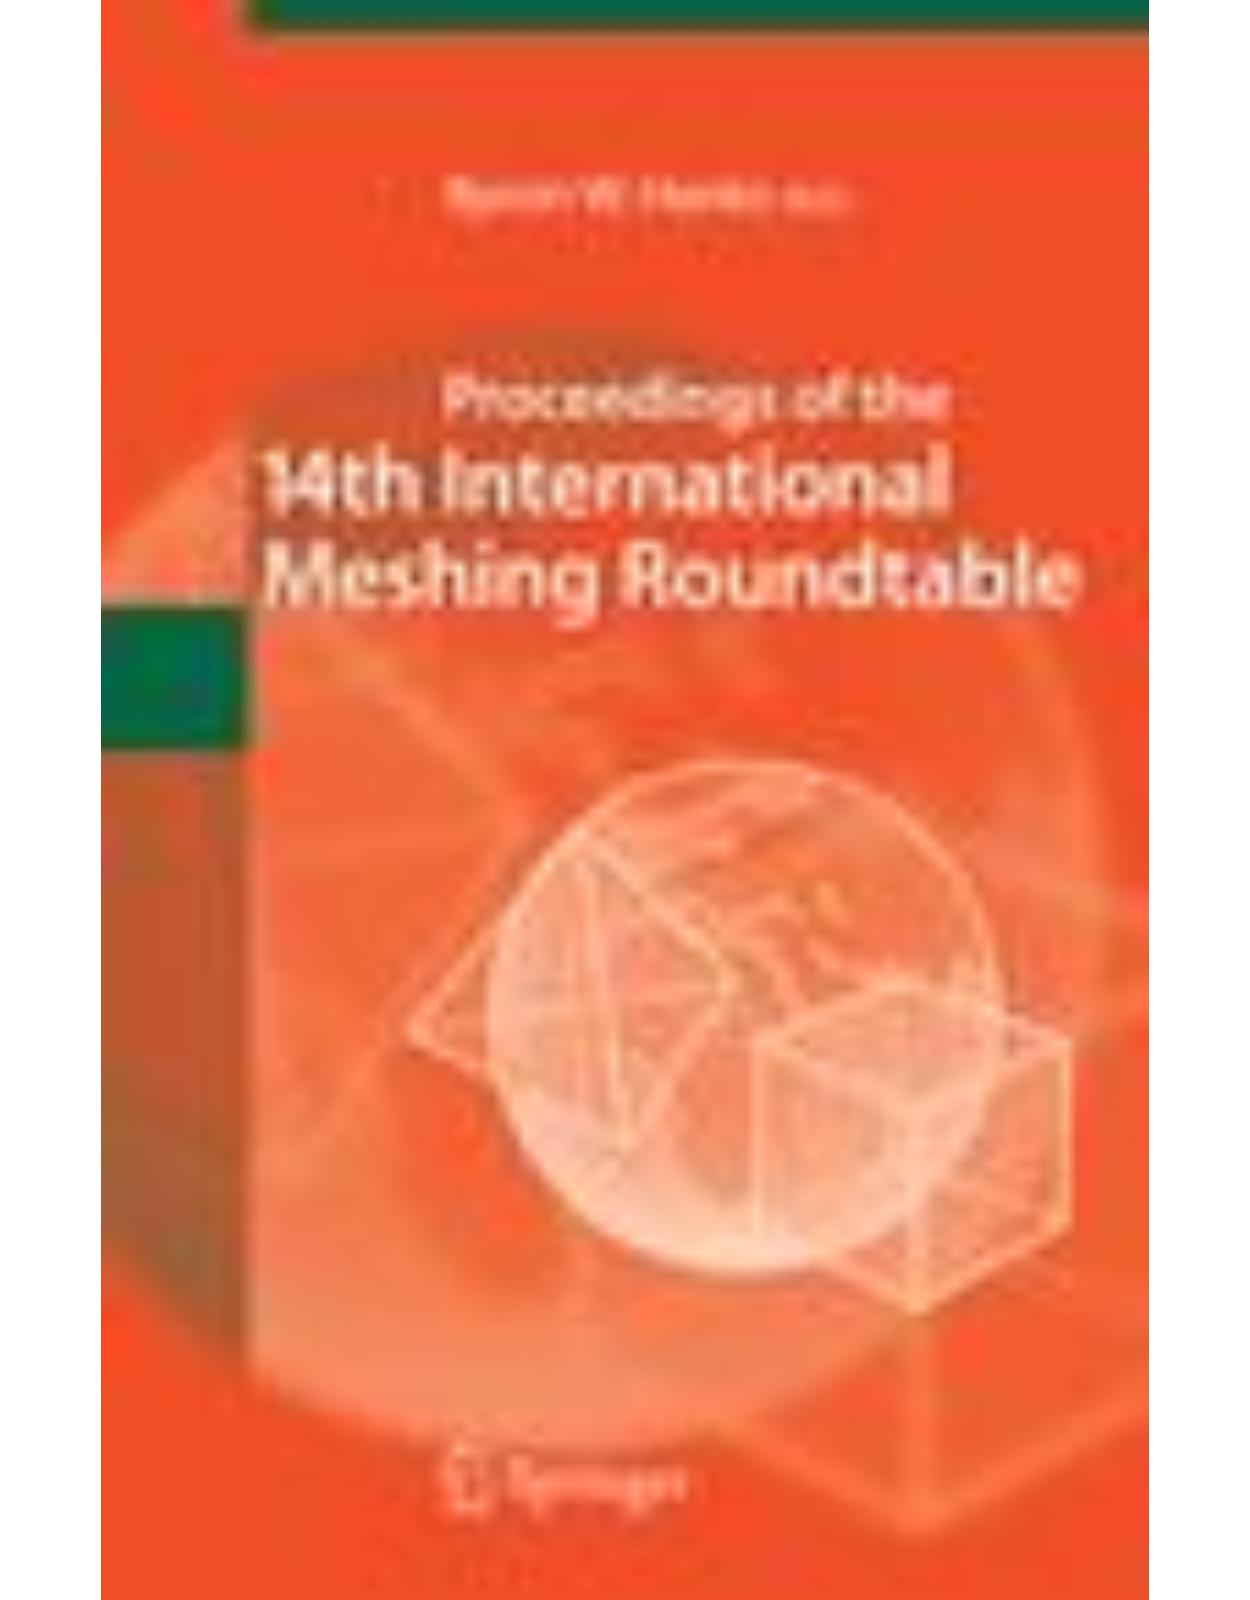 Proceedings of the 14th International Meshing Roundtable